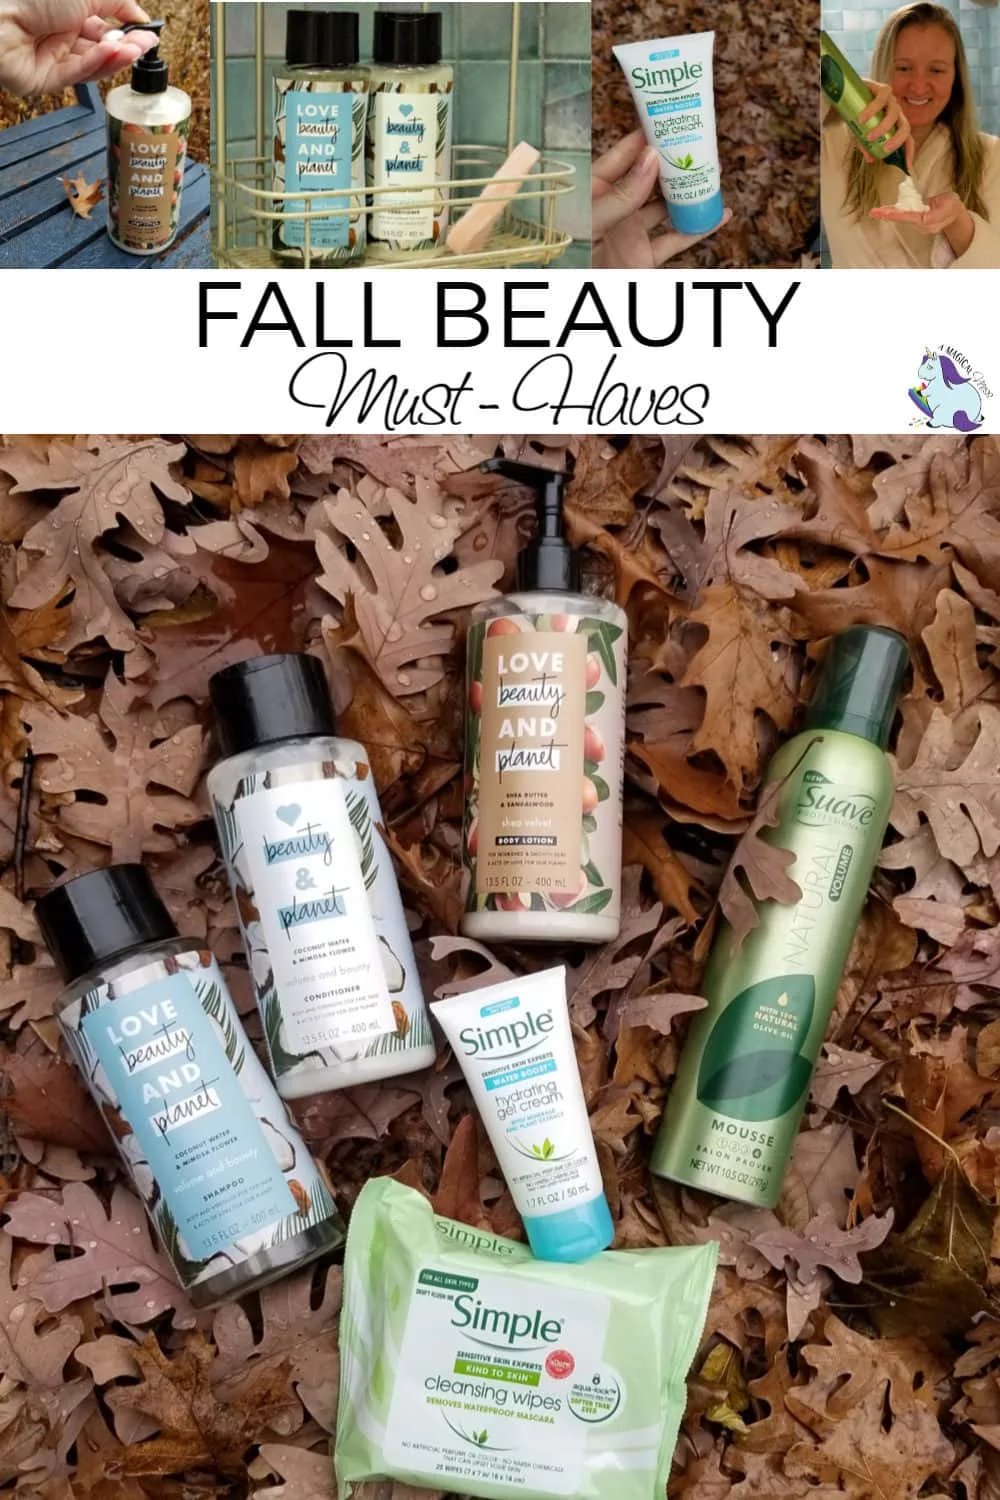 Sponsored Partnership: Fall Beauty Must - Haves all found at Jewel-Osco! #TakeANewLook18